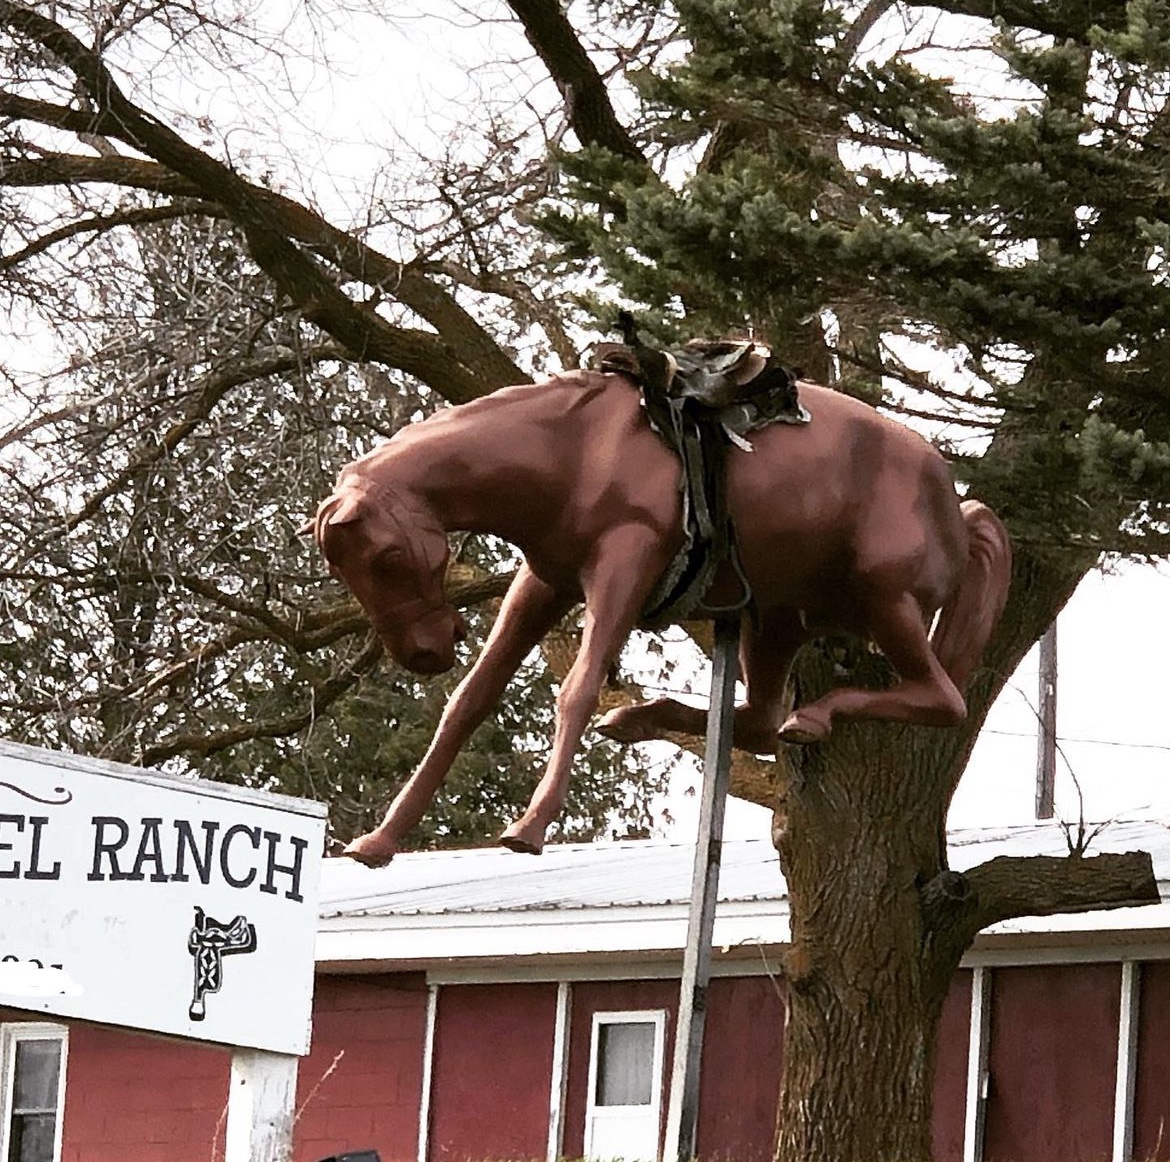 On M-68 just east of #OnawayMichigan you will find this big #horse #sculpture on a pole at #WagonWheelRanch! It's been there since I was in elementary school and it's pretty cool! 🐴

#wiltonwanderlust #travel #roadsideattractions #fun #roadsideoddities #wagonwheelranch #onaway